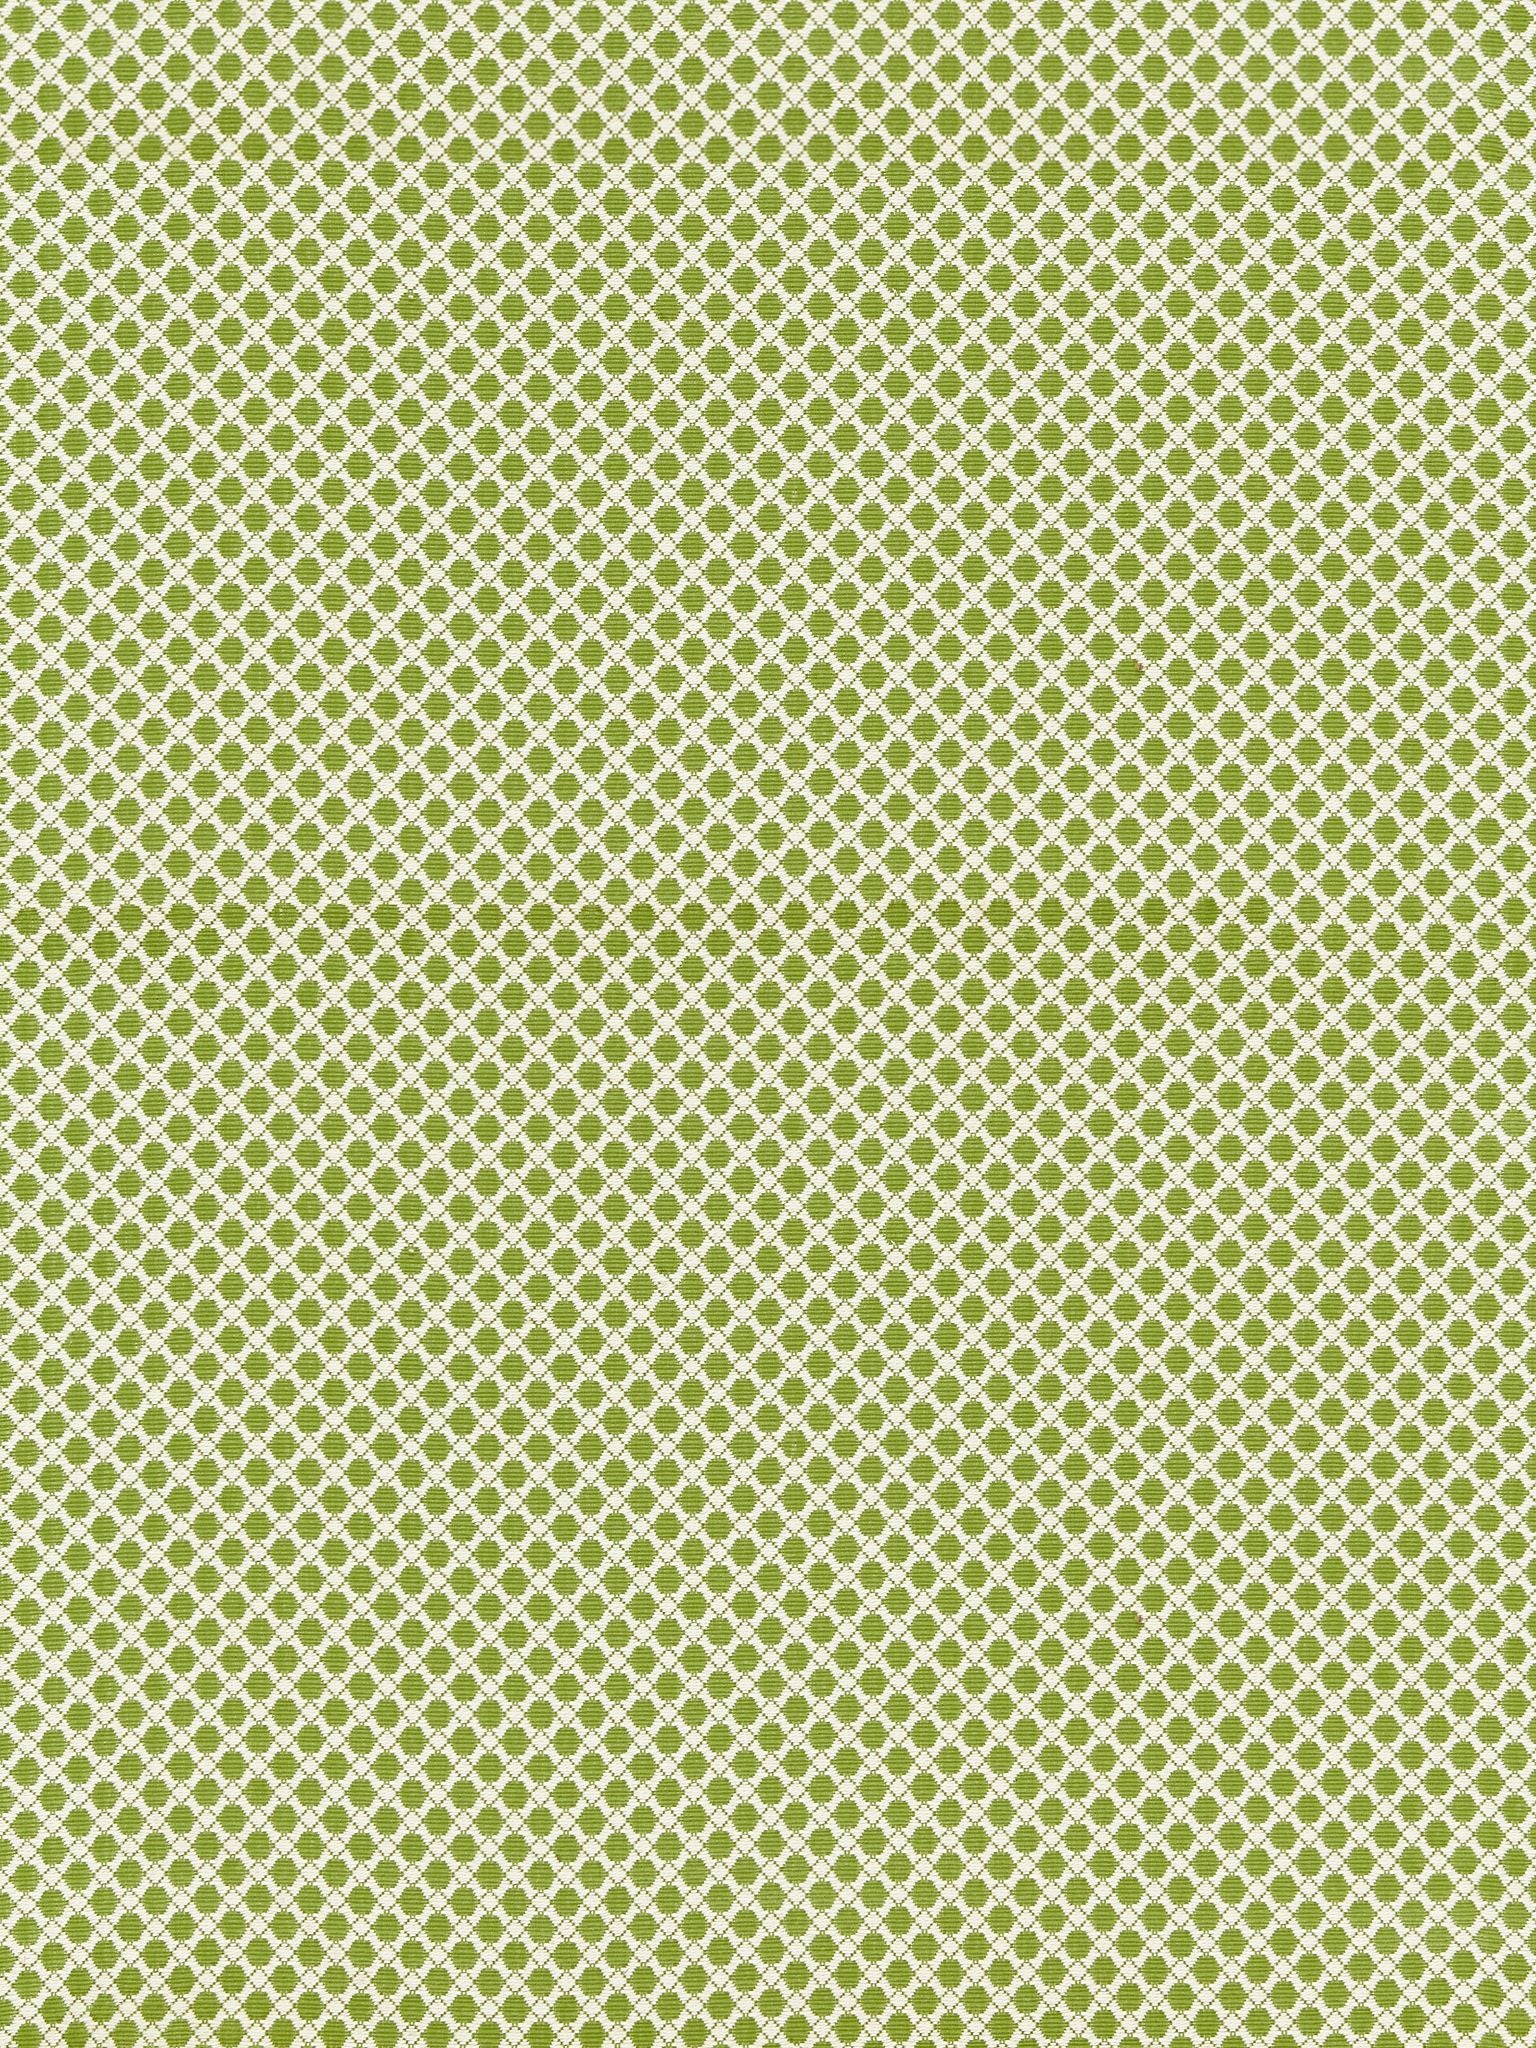 Bellaire Trellis fabric in leaf color - pattern number BK 0003K65121 - by Scalamandre in the Old World Weavers collection